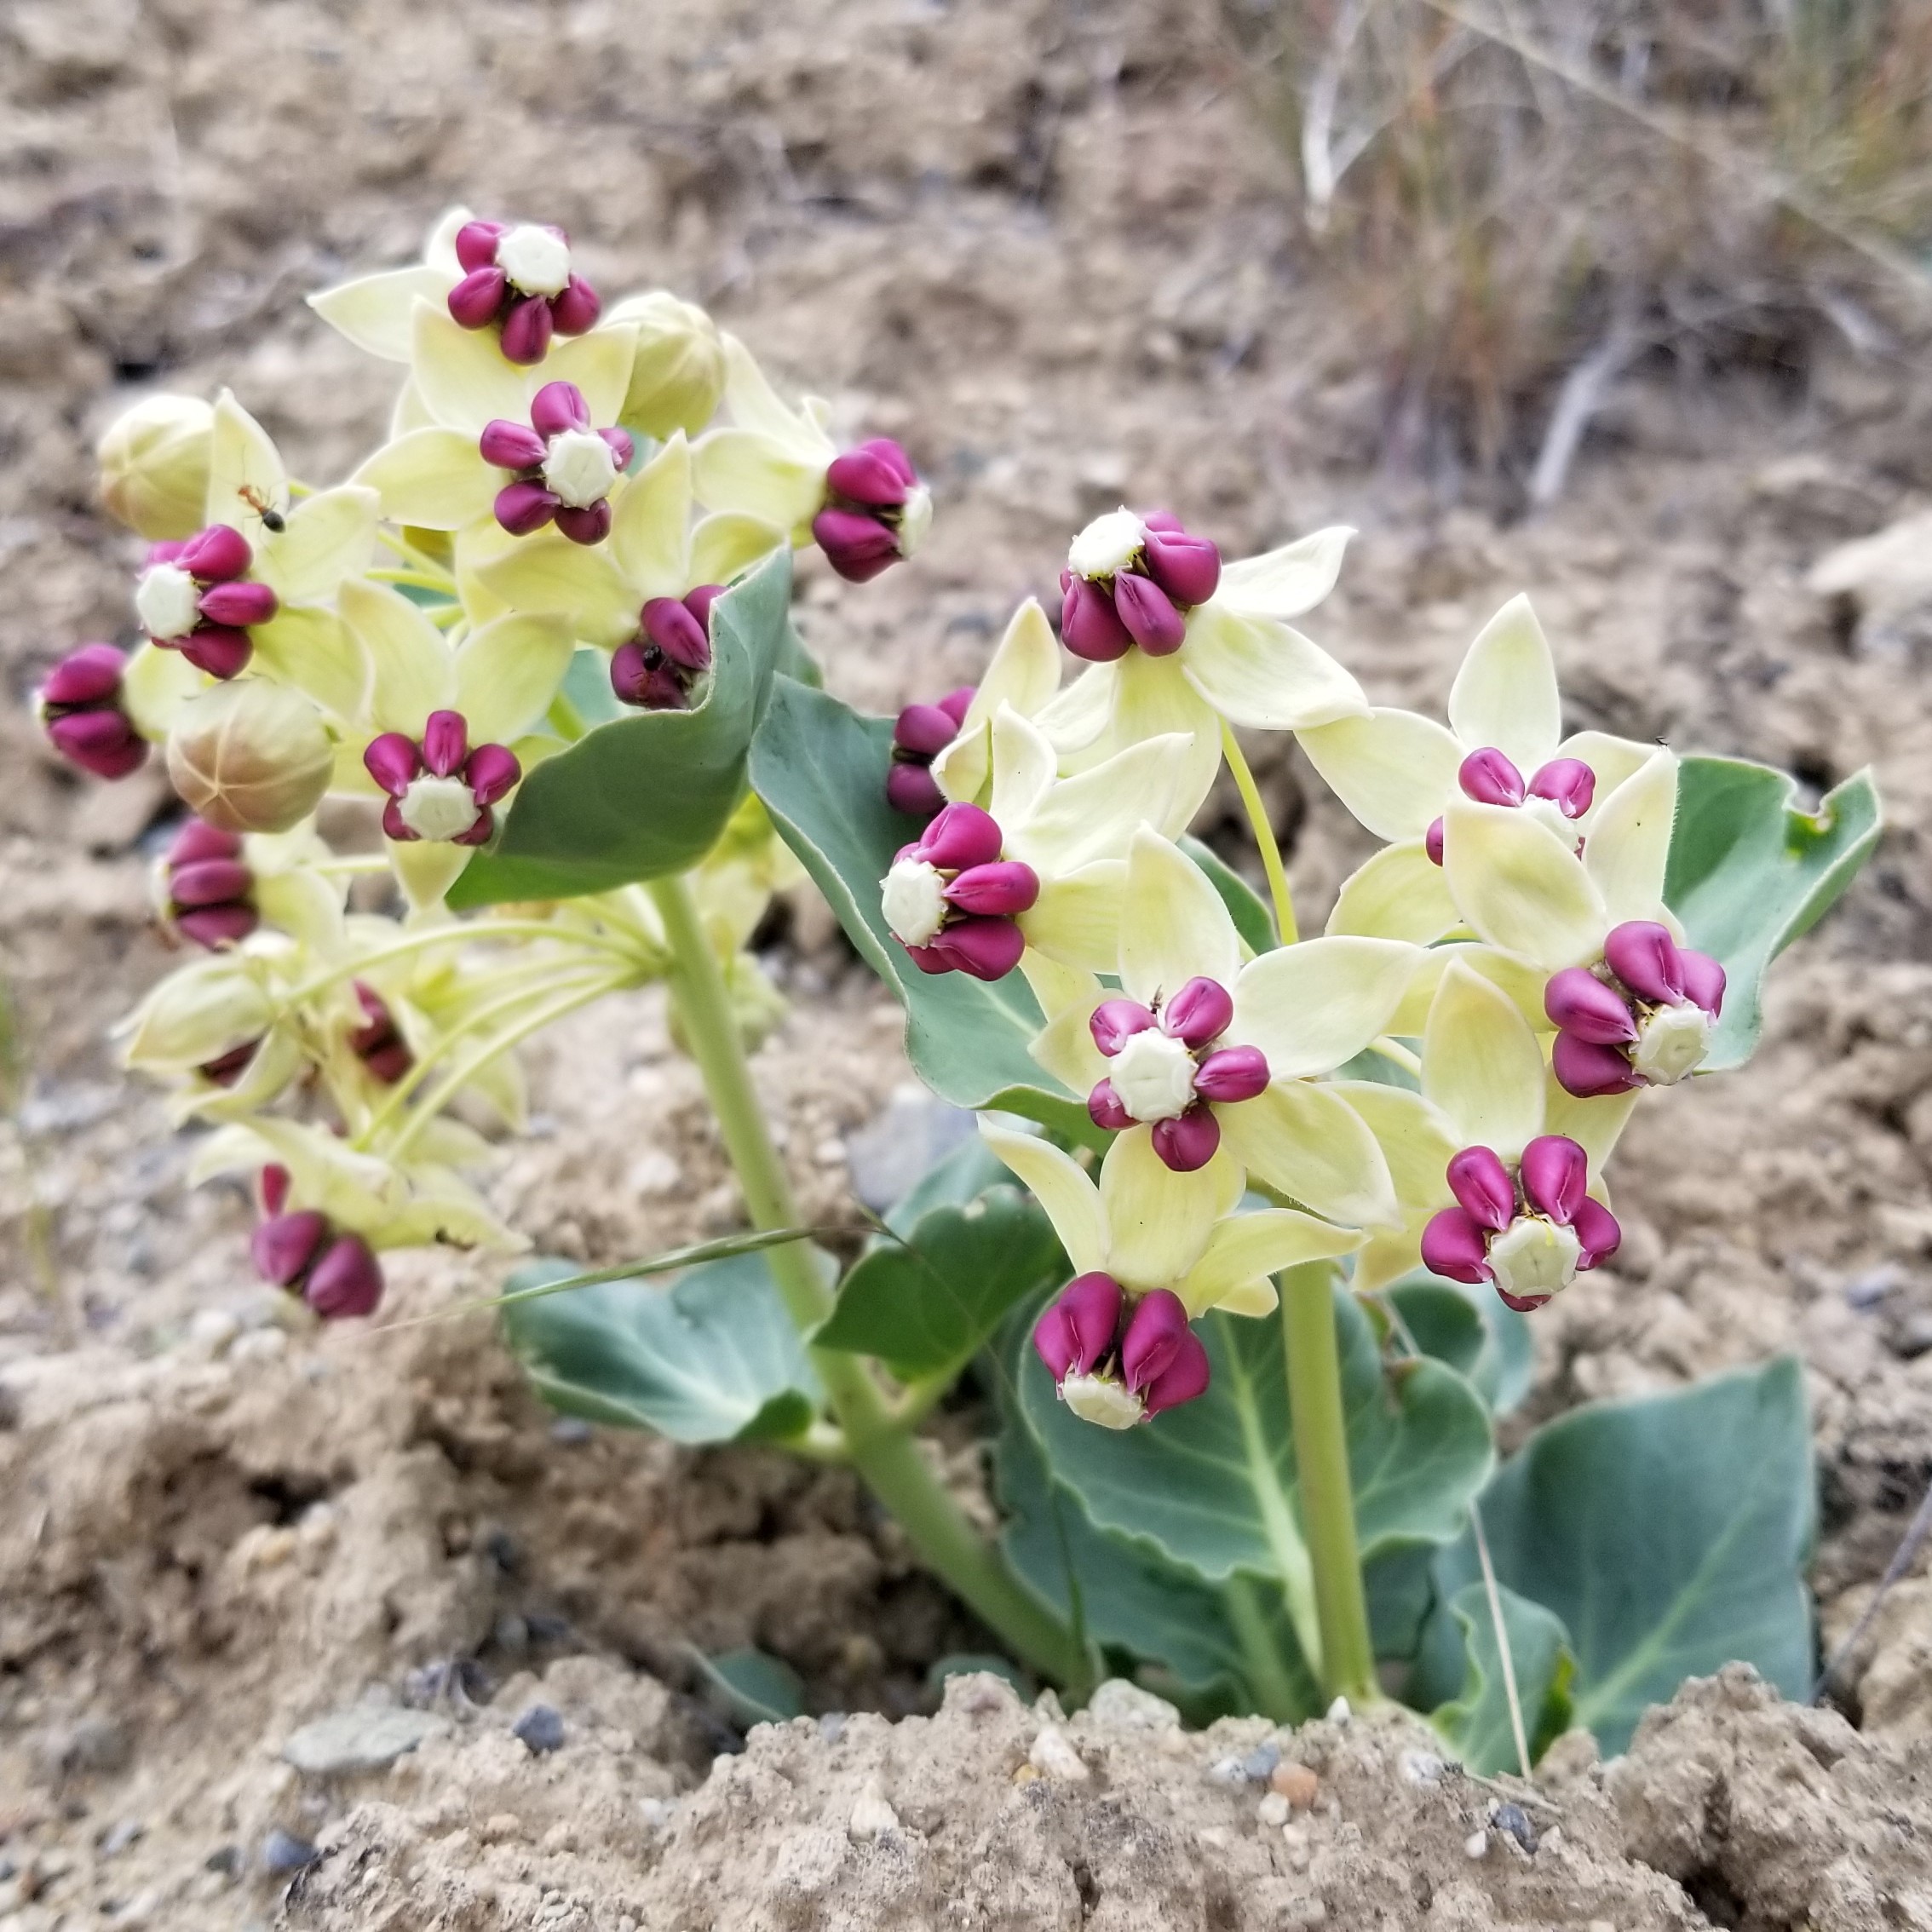 A small milkweed plant is in bloom with yellow and pink petals in open, dry soil.